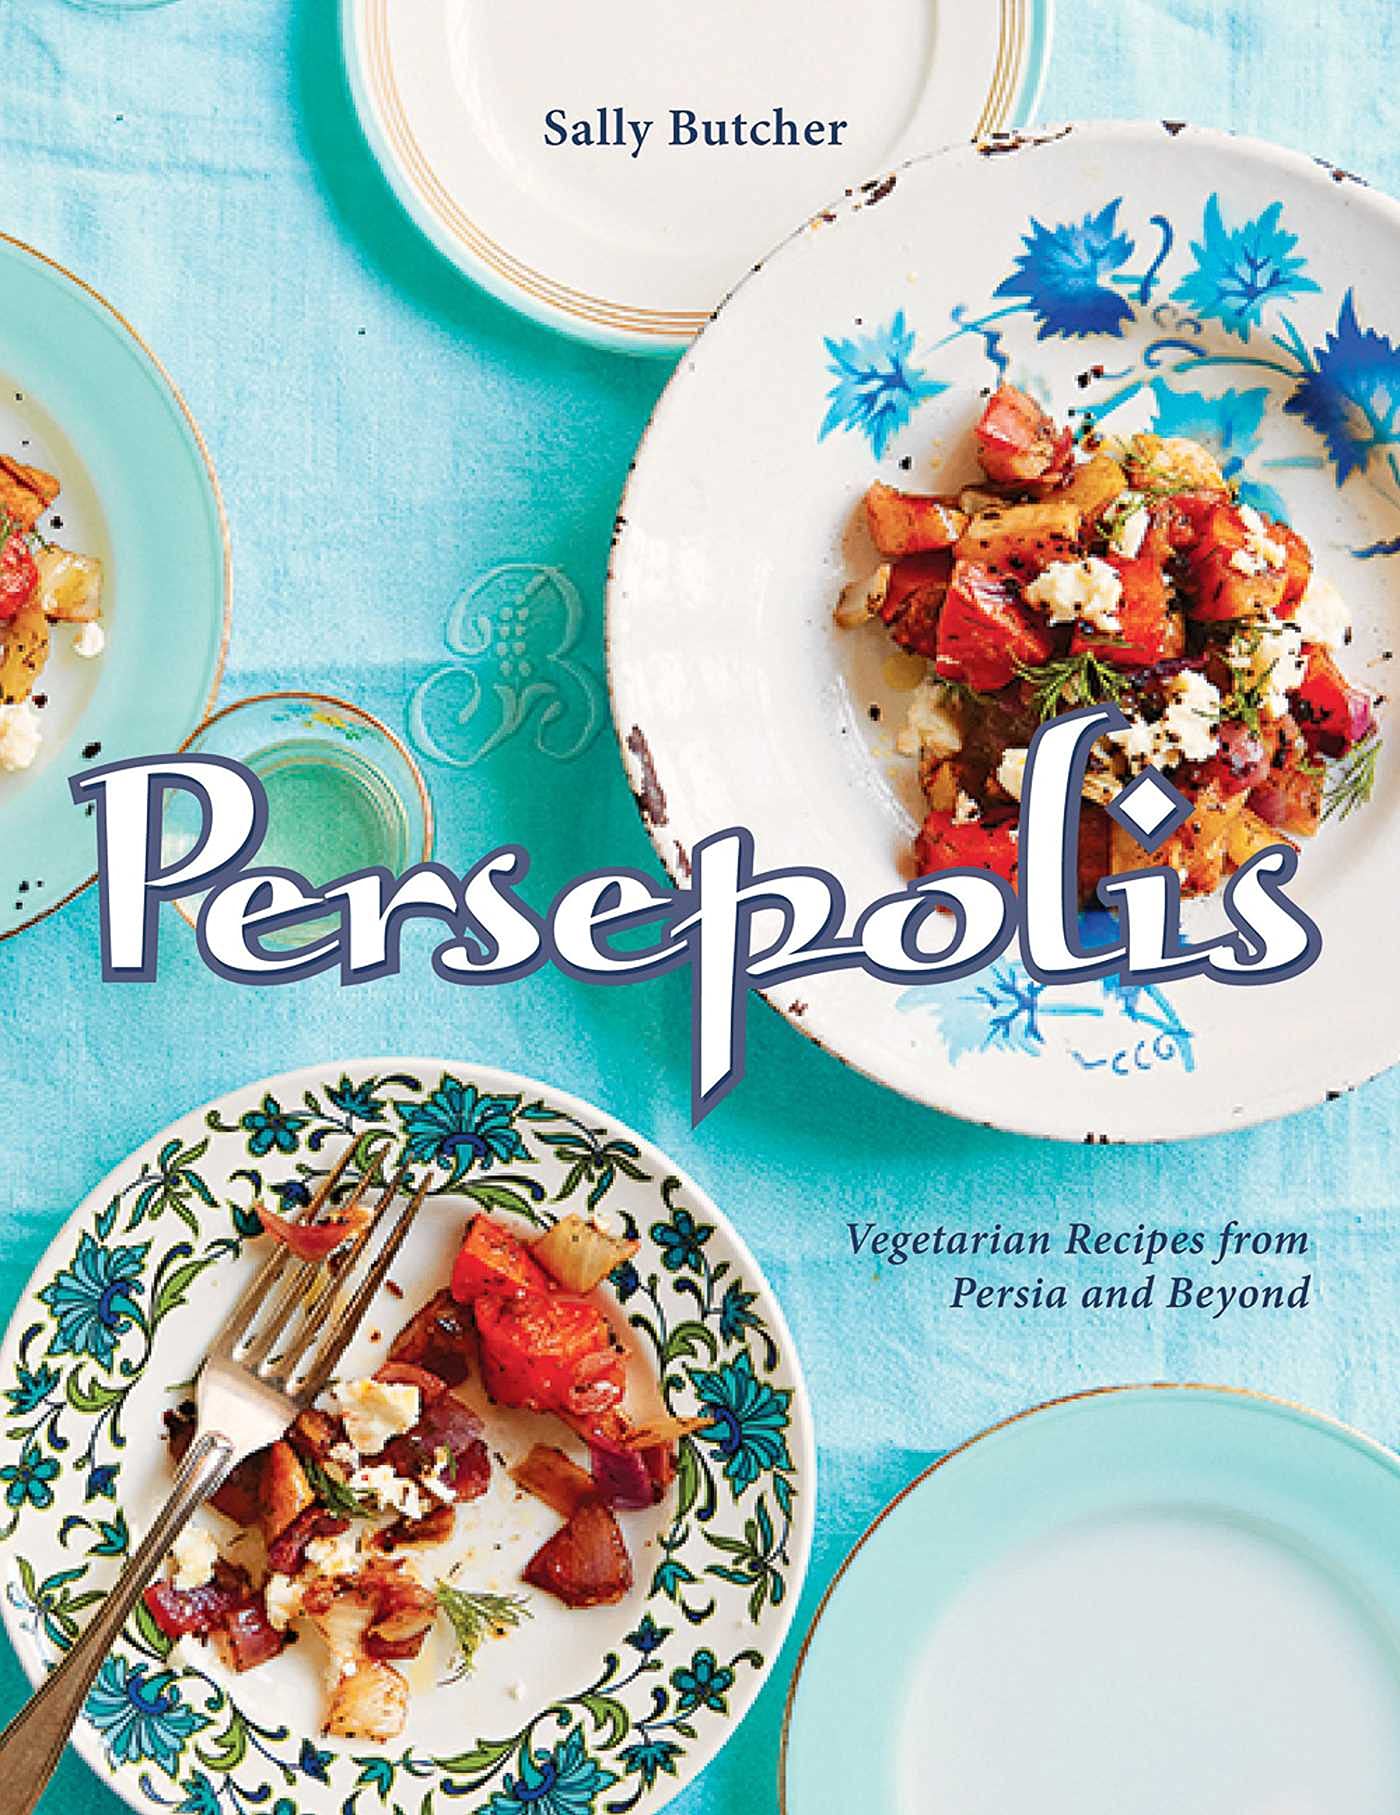 Persepolis: Vegetarian Recipes from Persia and Beyond (Sally Butcher)